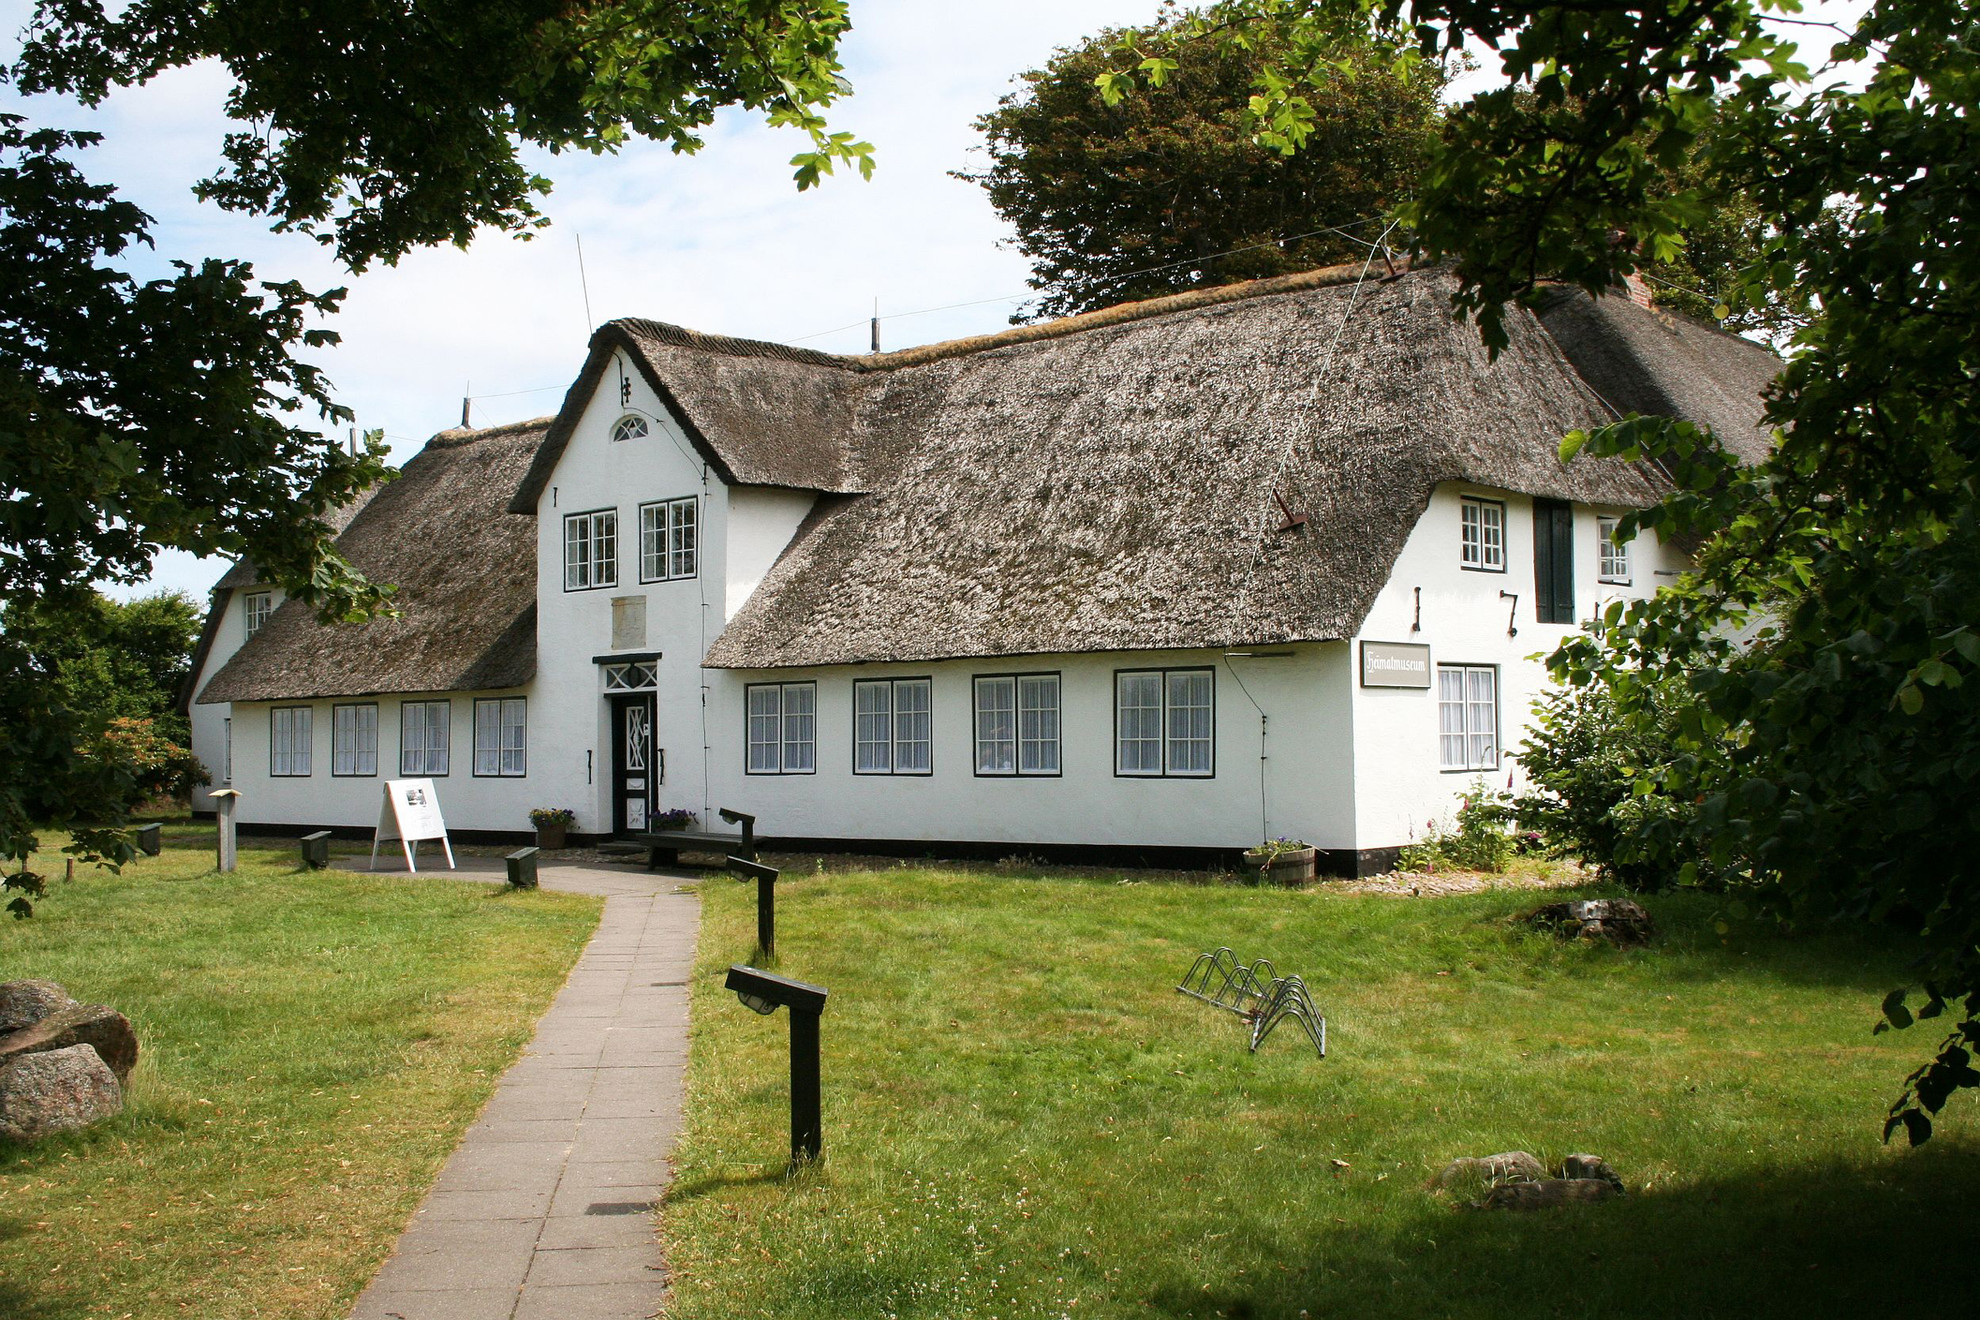 Sylt Museum